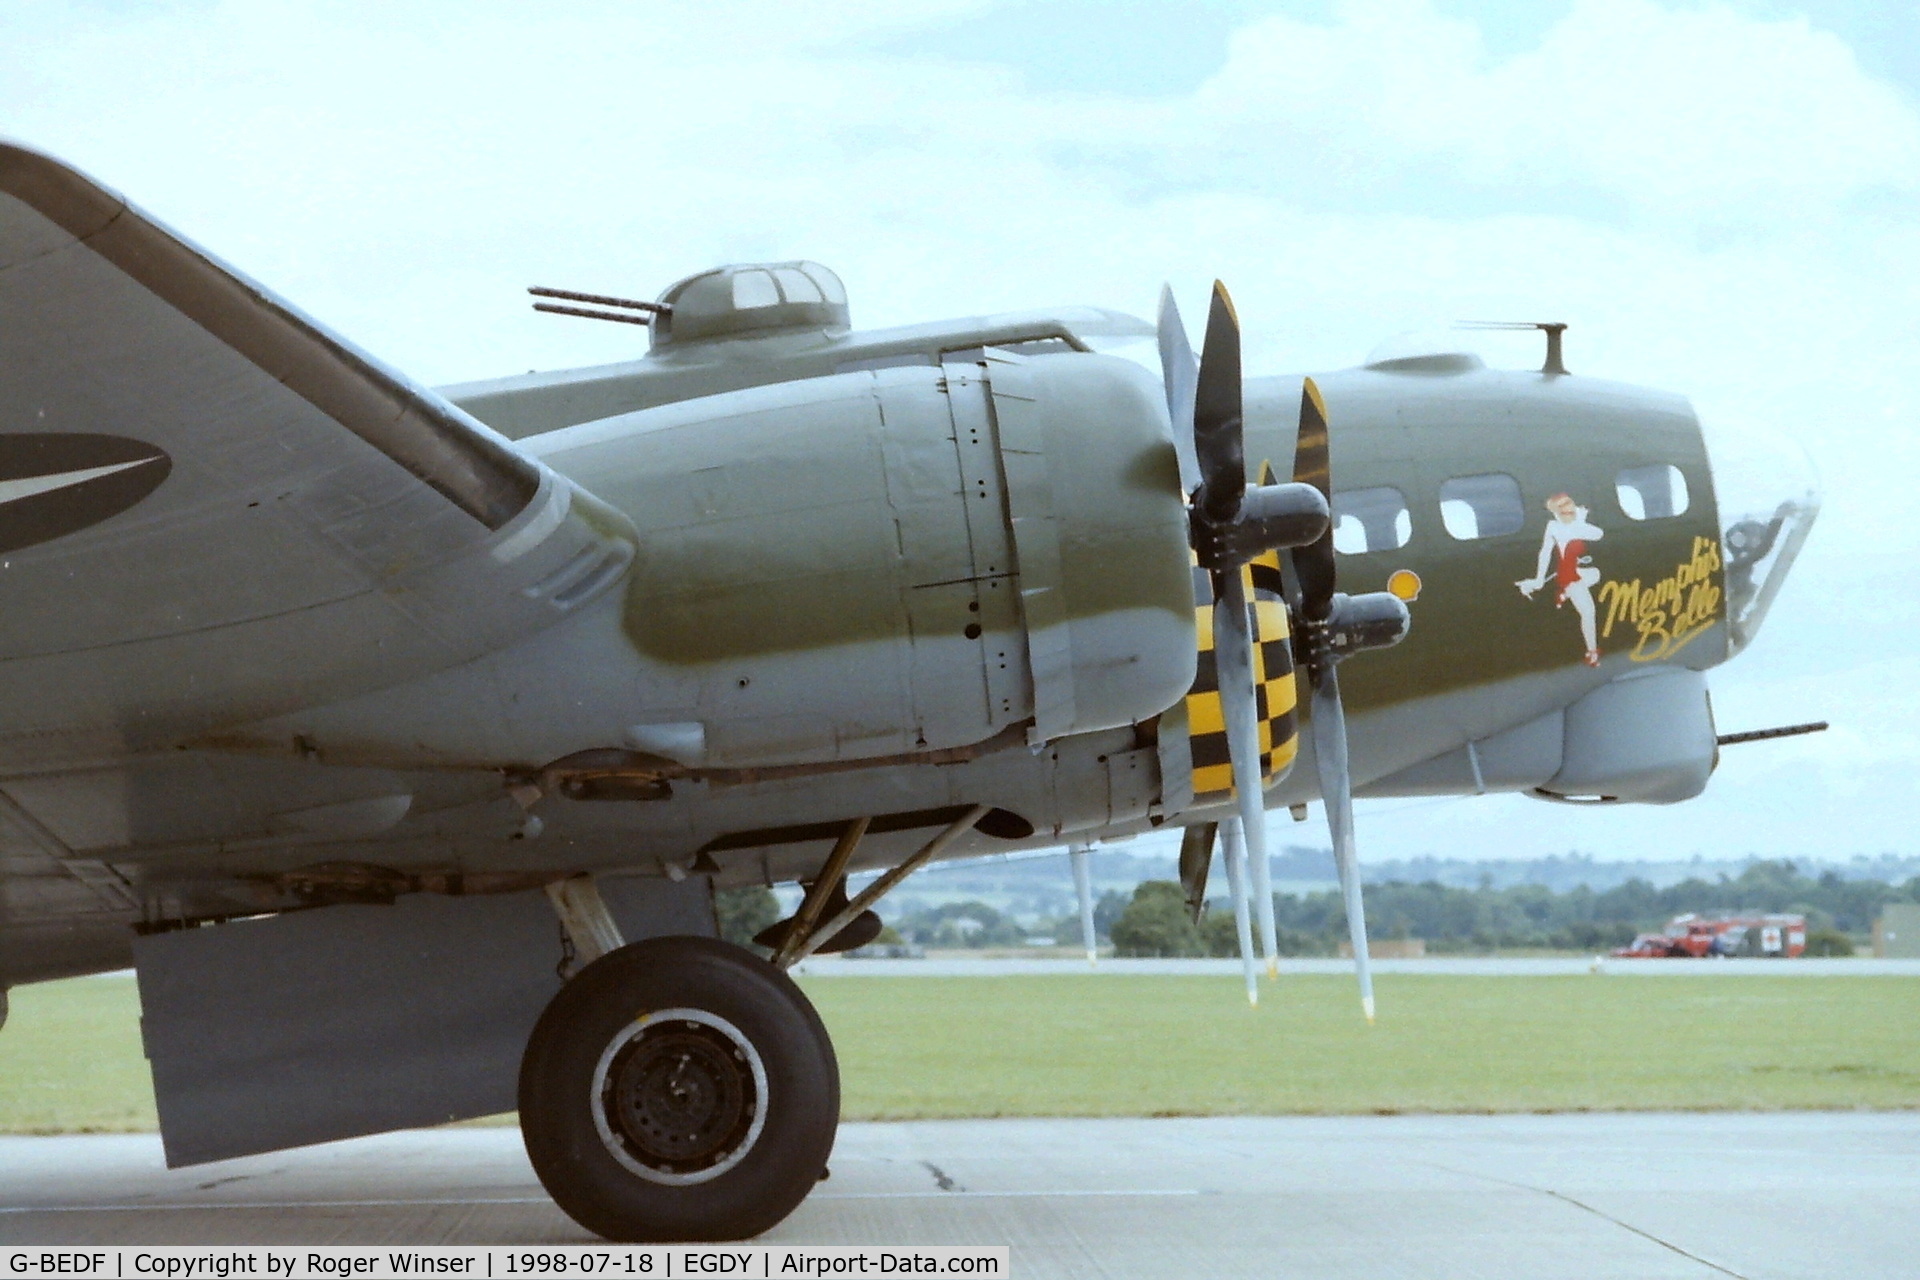 G-BEDF, 1944 Boeing B-17G Flying Fortress C/N 8693, As Memphis Belle at RNAS Yeovilton Air Day 1998